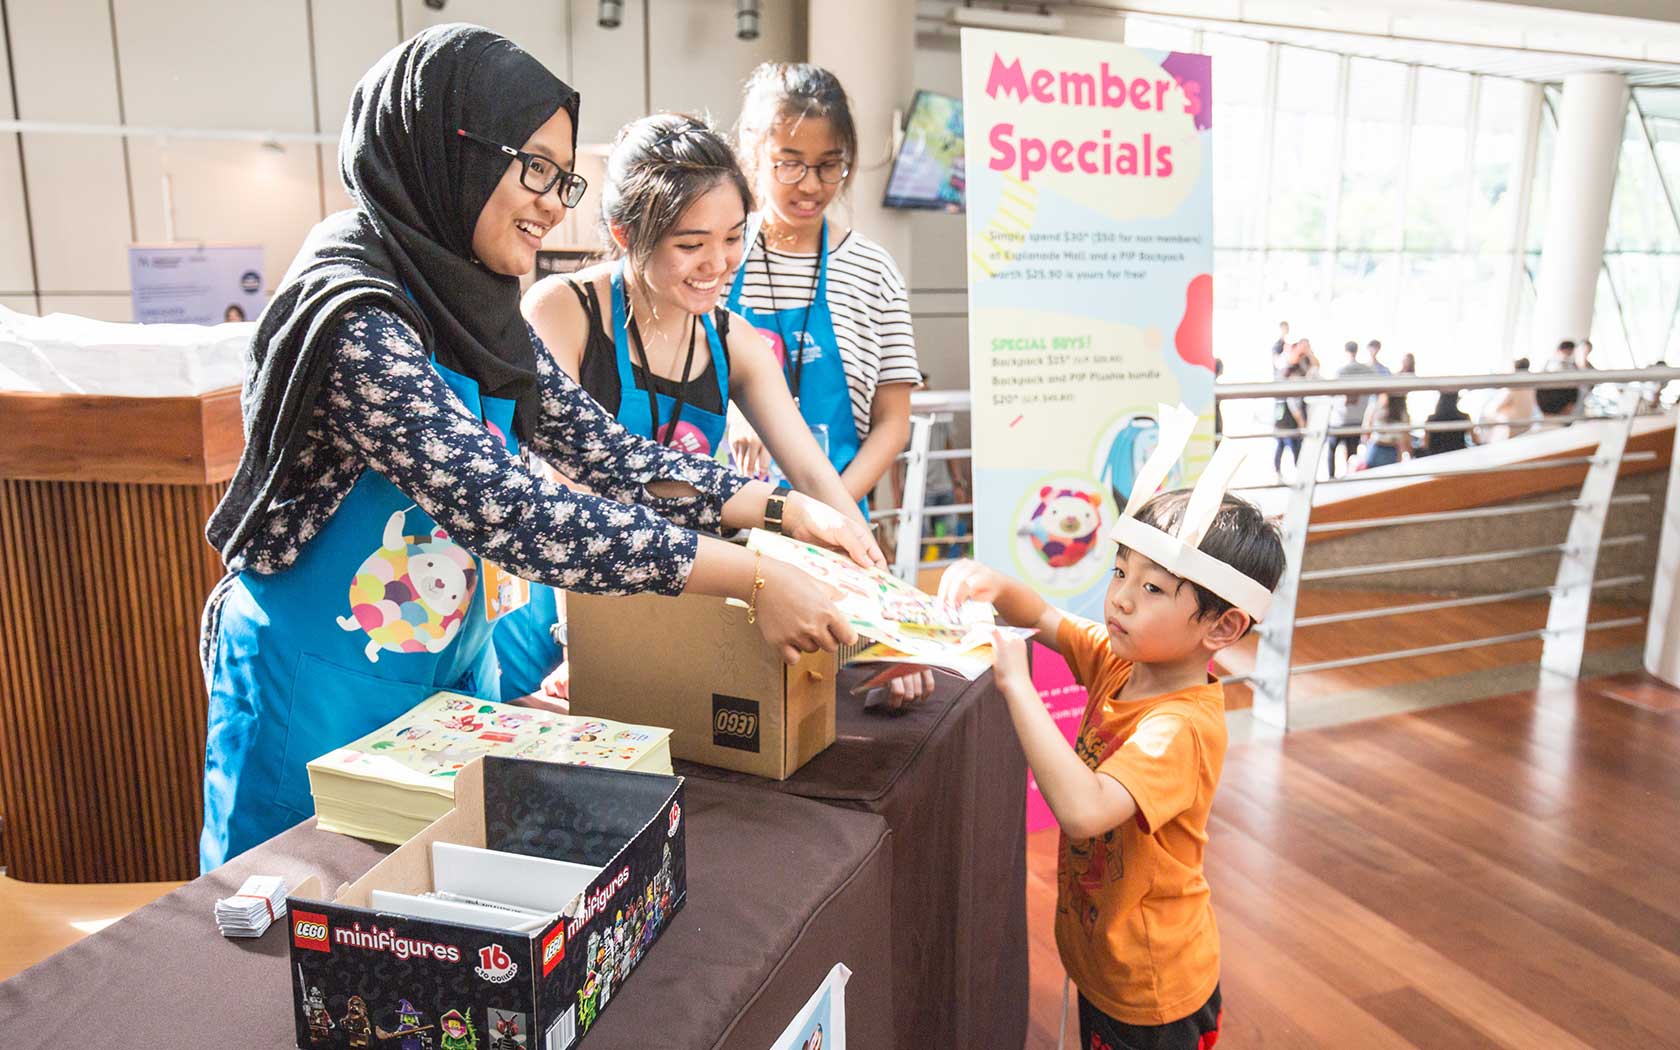 Image of volunteers manging a booth for Esplanade's PIP's Club membership and attending to a child.